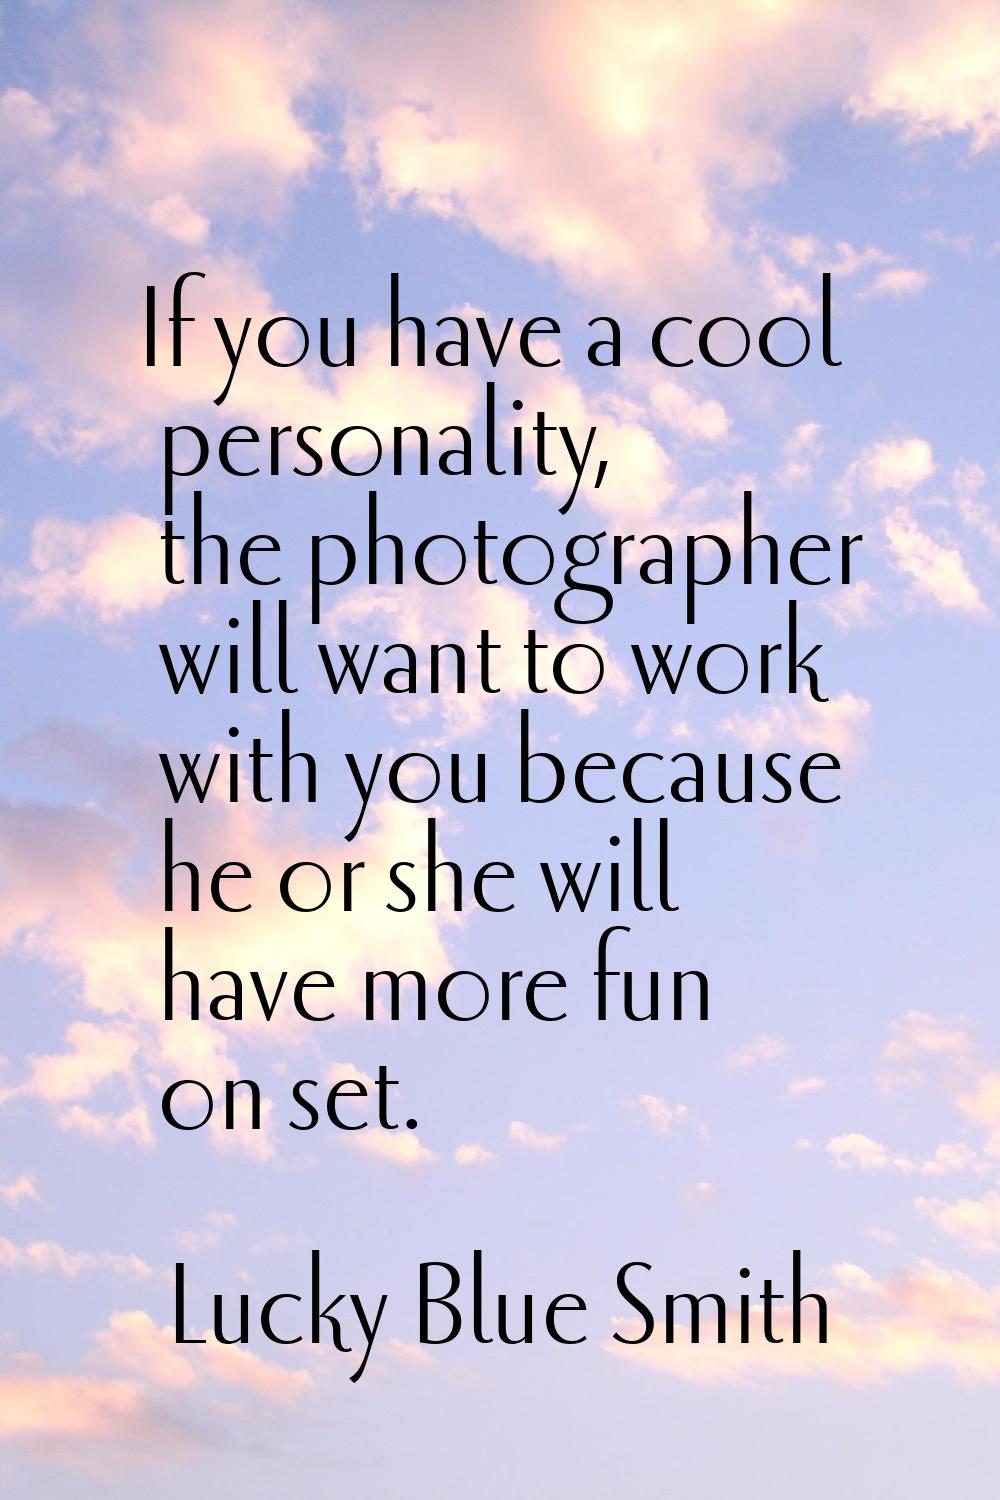 If you have a cool personality, the photographer will want to work with you because he or she will 